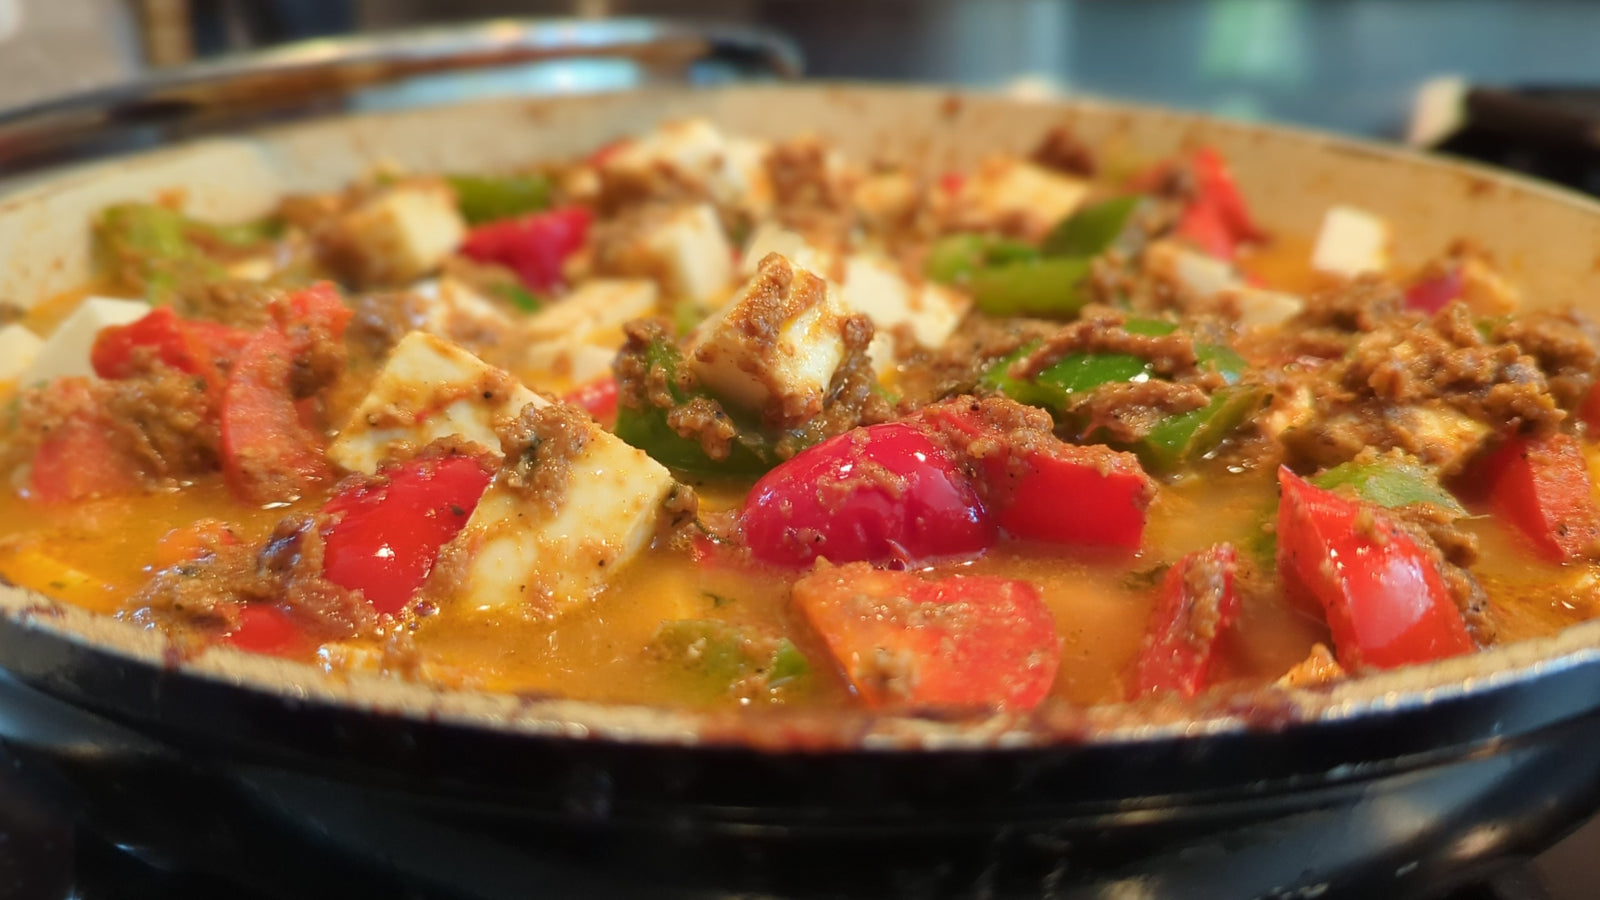 a homestyle cheese with crispy red and green bell peppers in a rich onion and tomato base curry